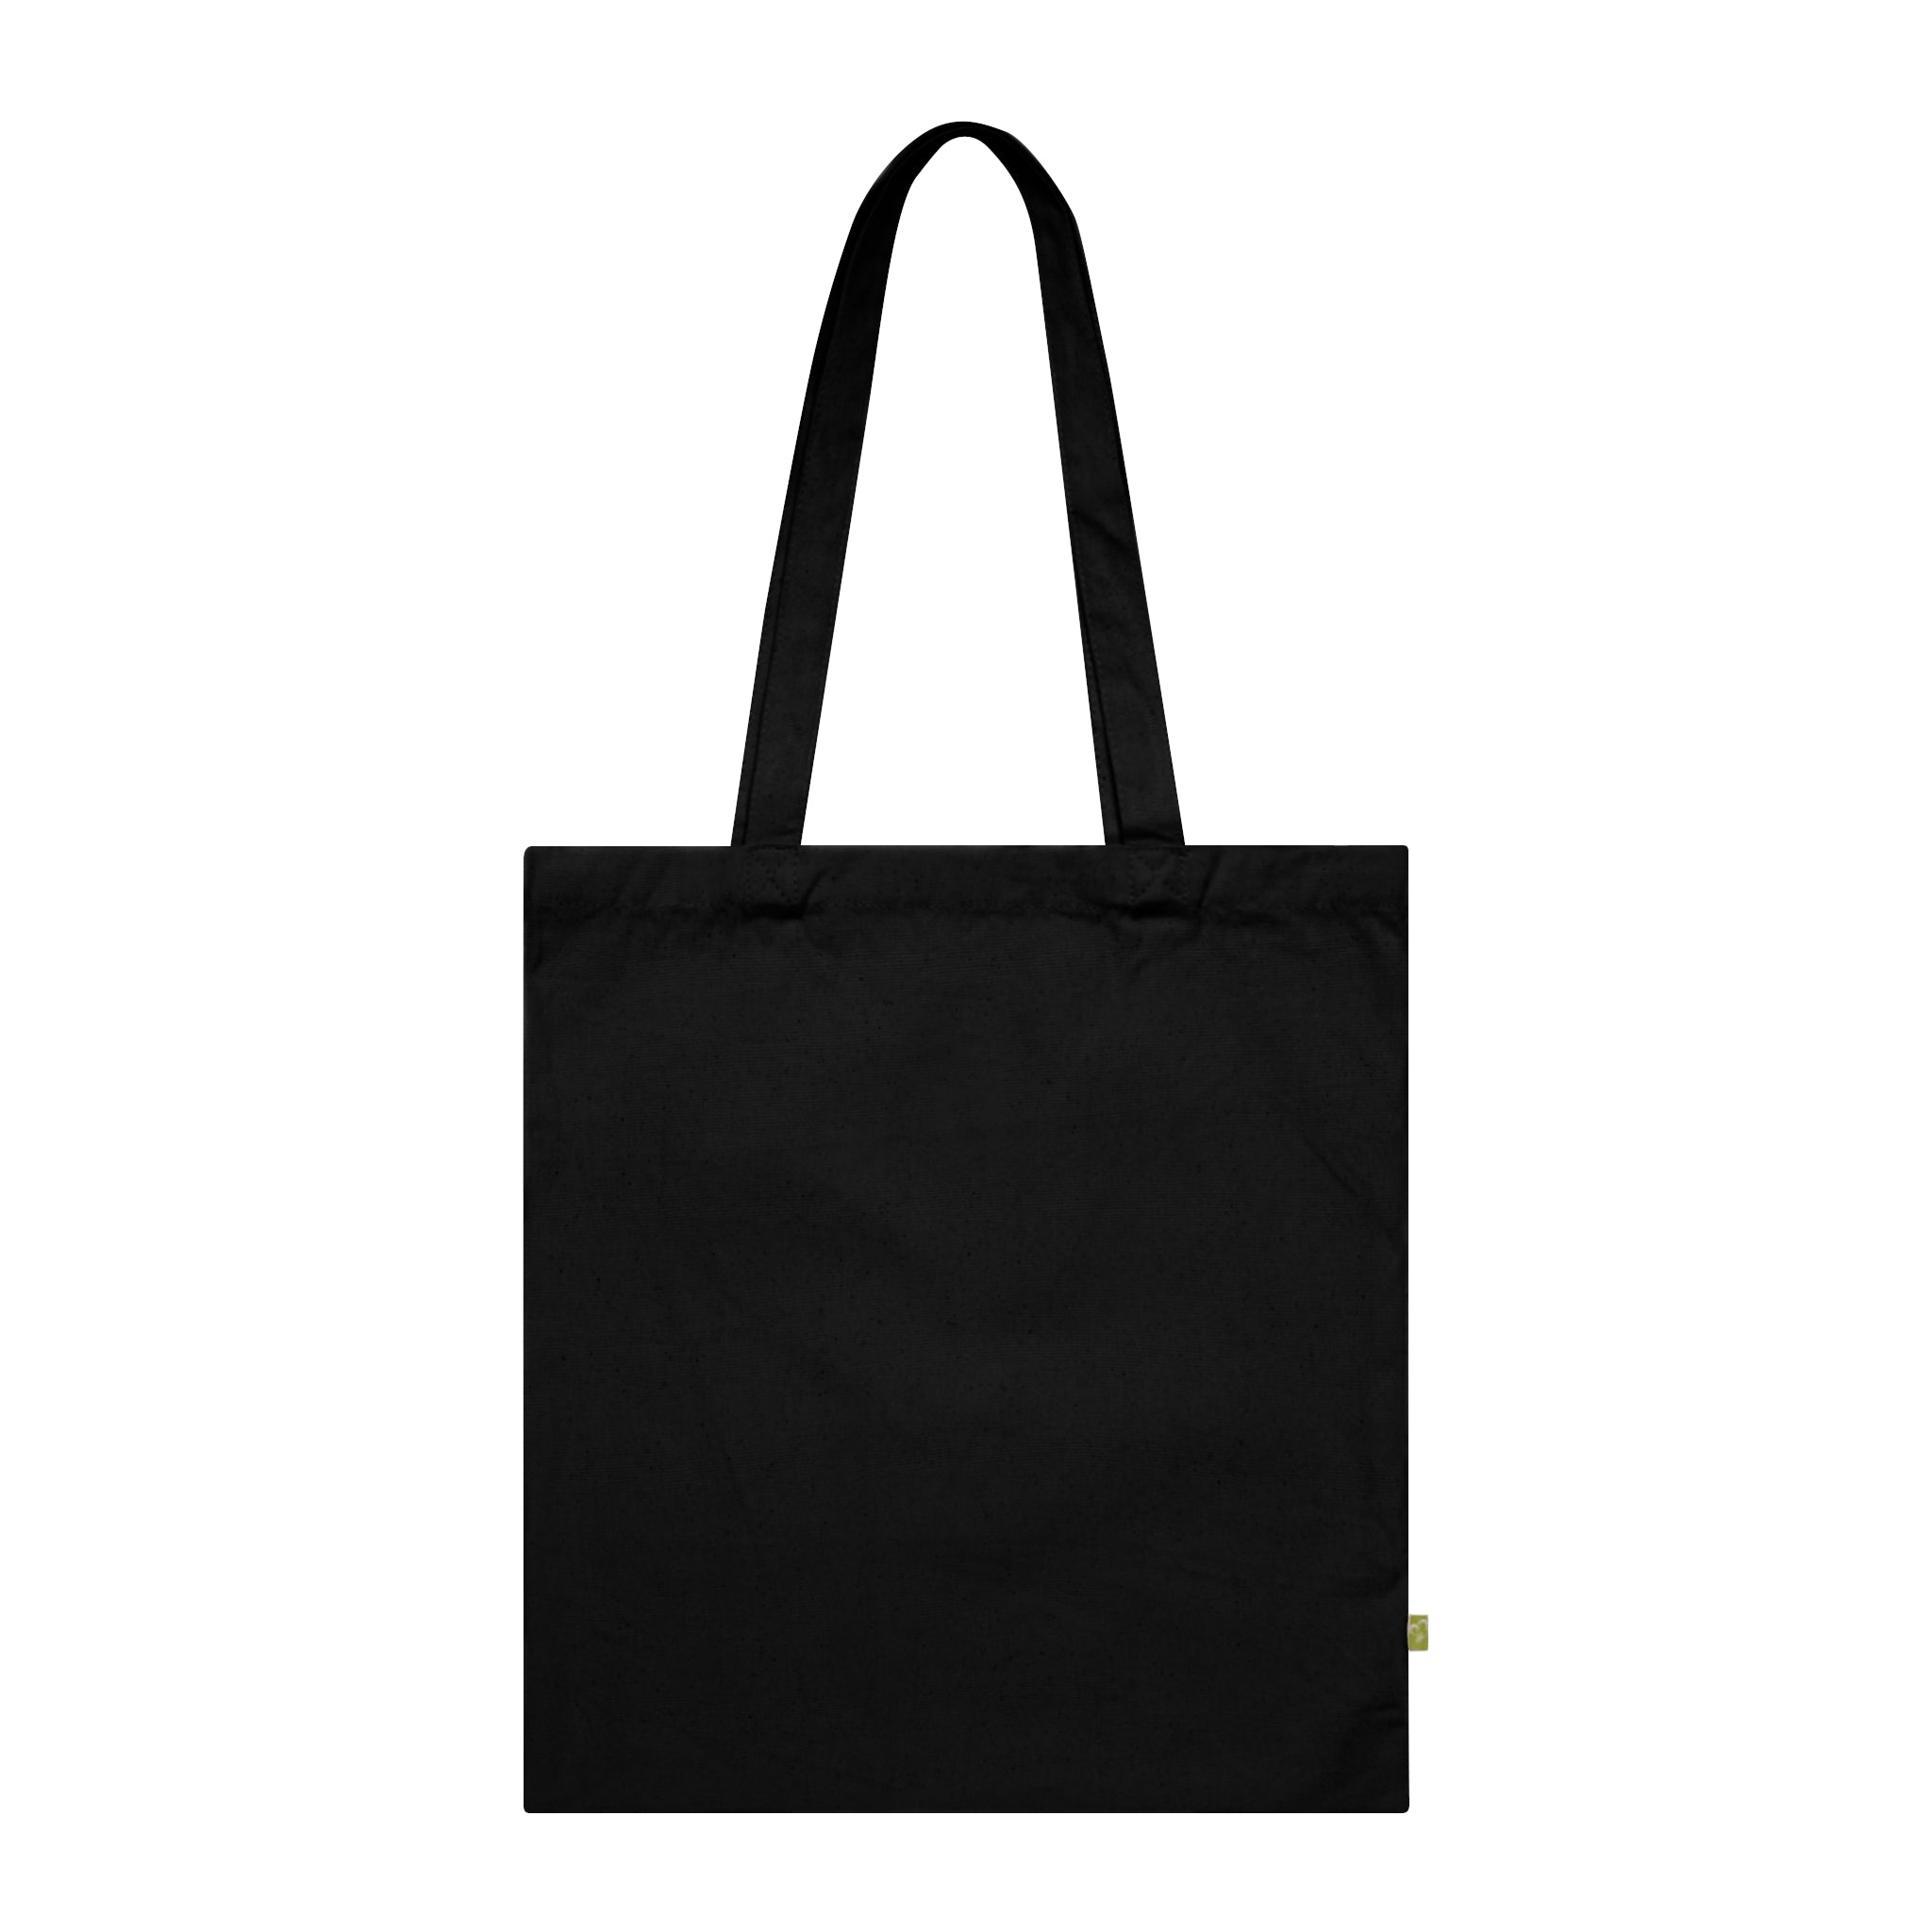 ORGANIC CERTIFIED THRIFTER TOTE BAG